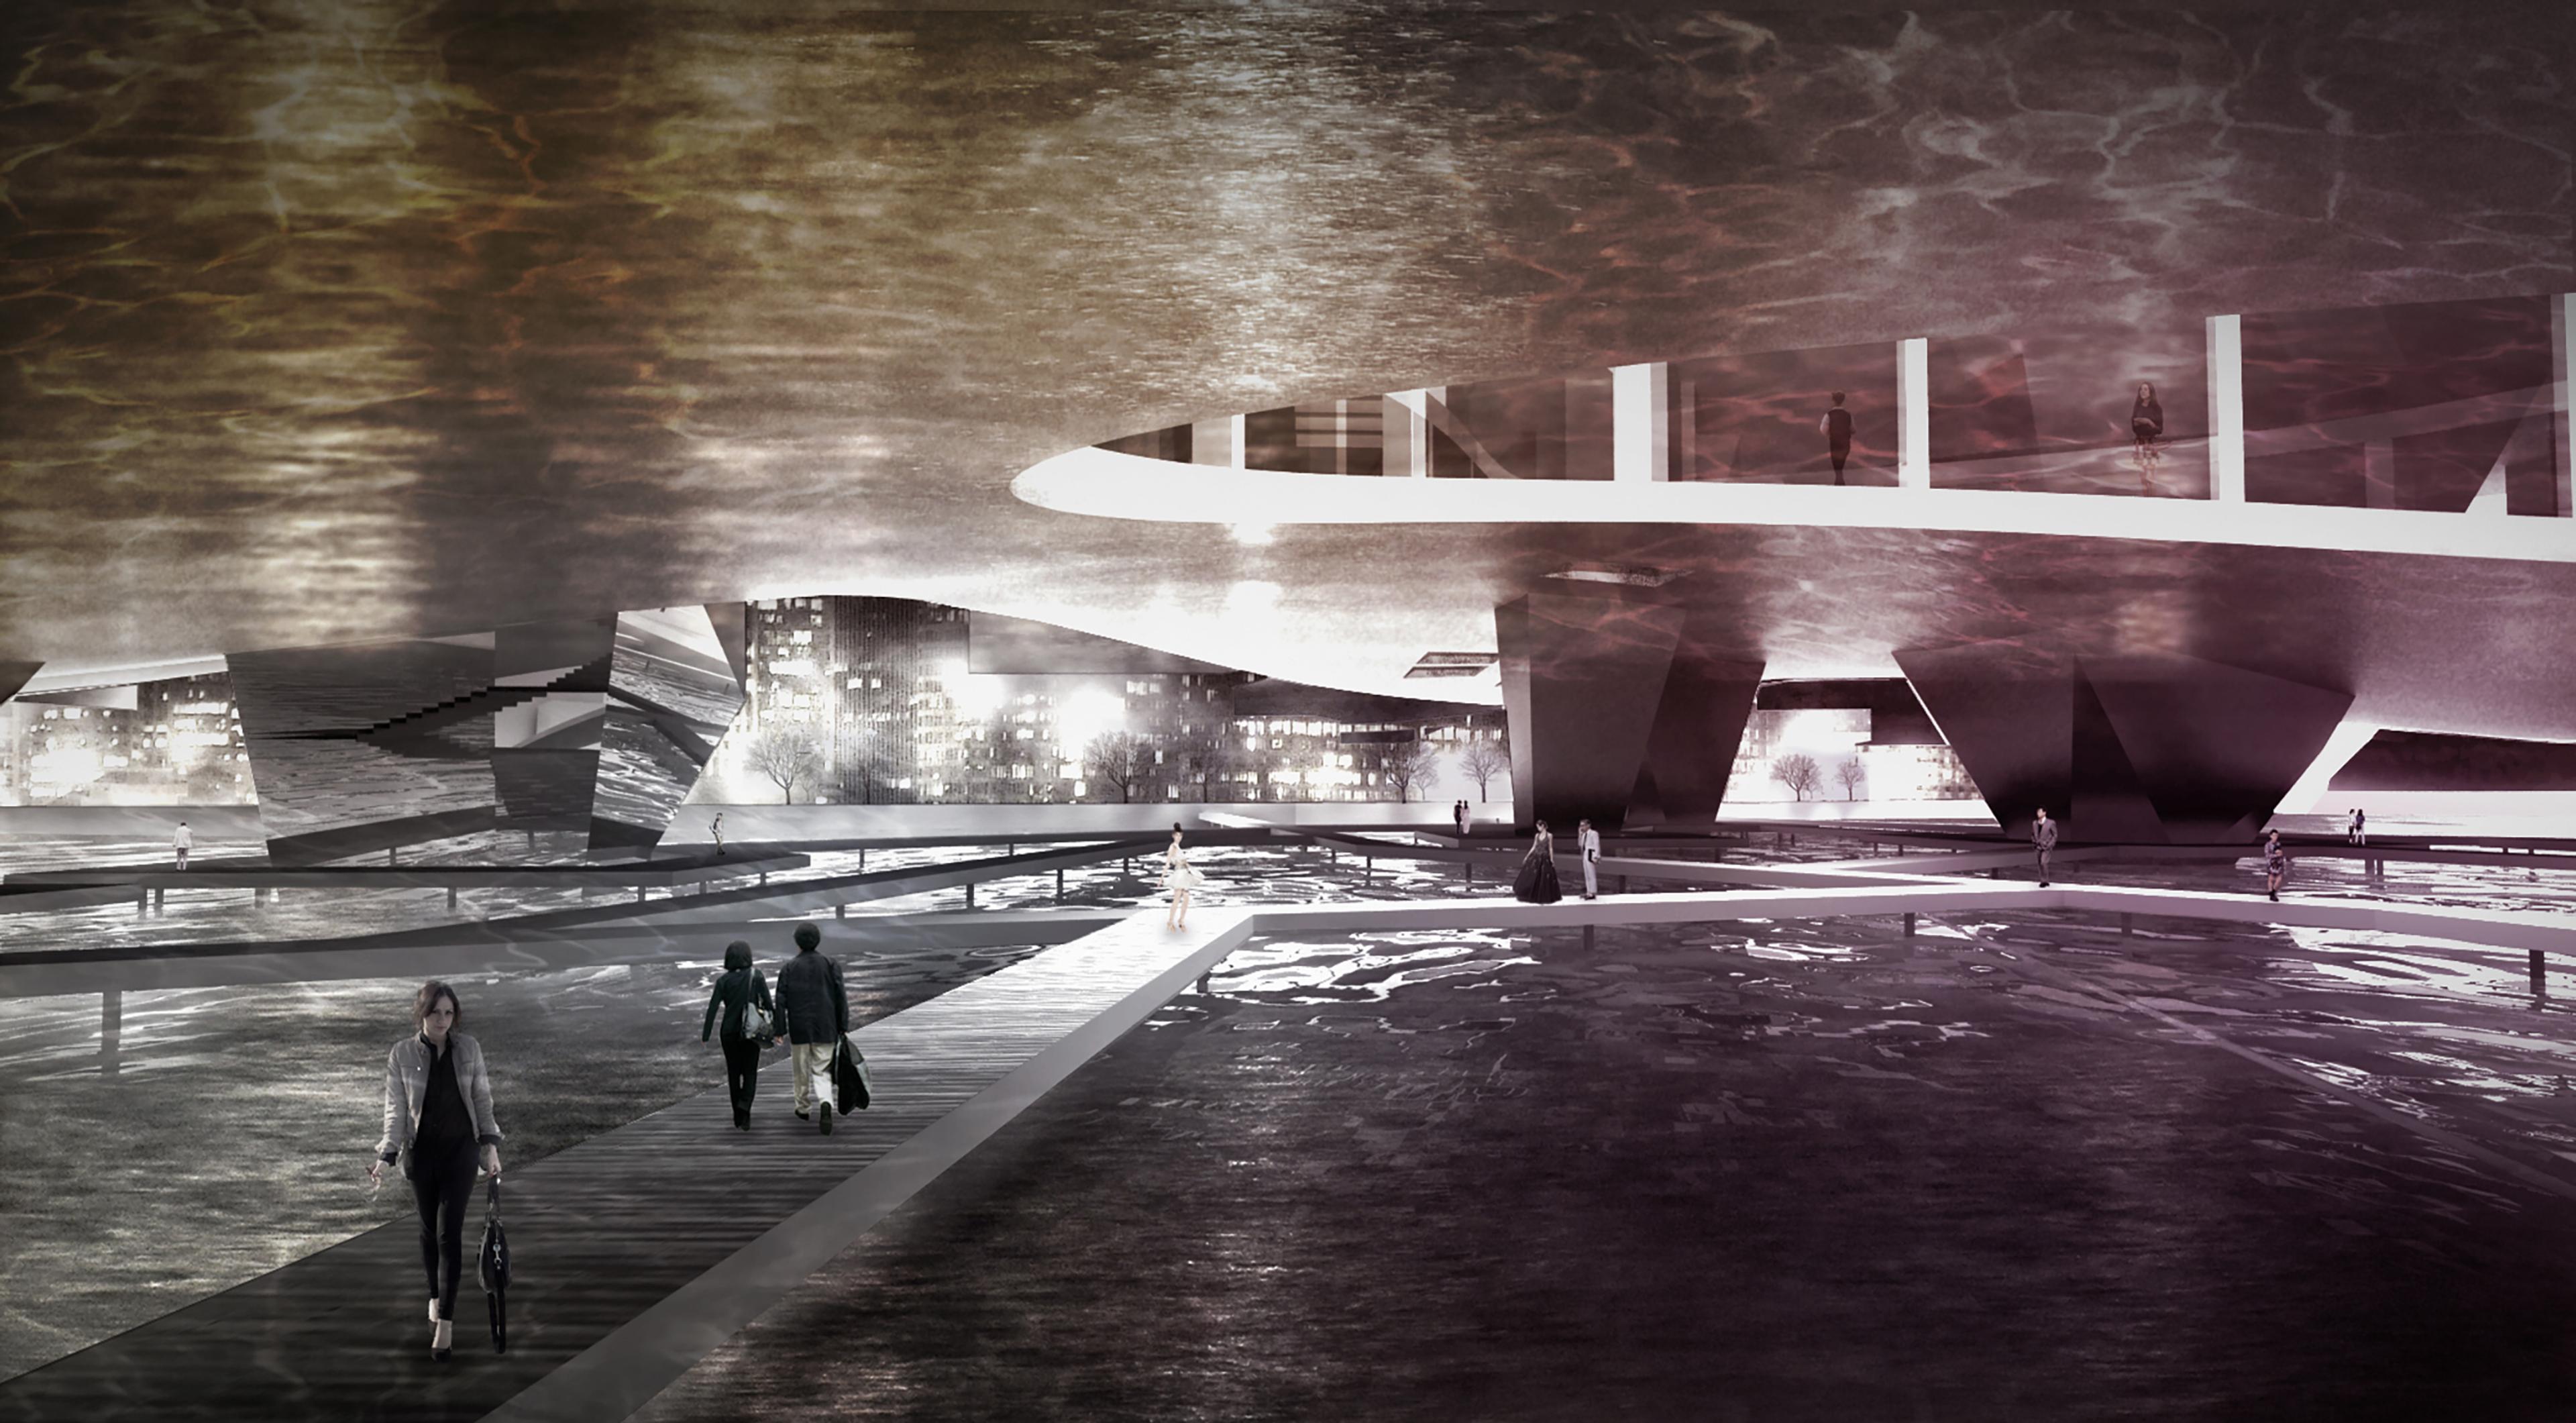 Architectural rendering of inside opera house building with water feature and people walking